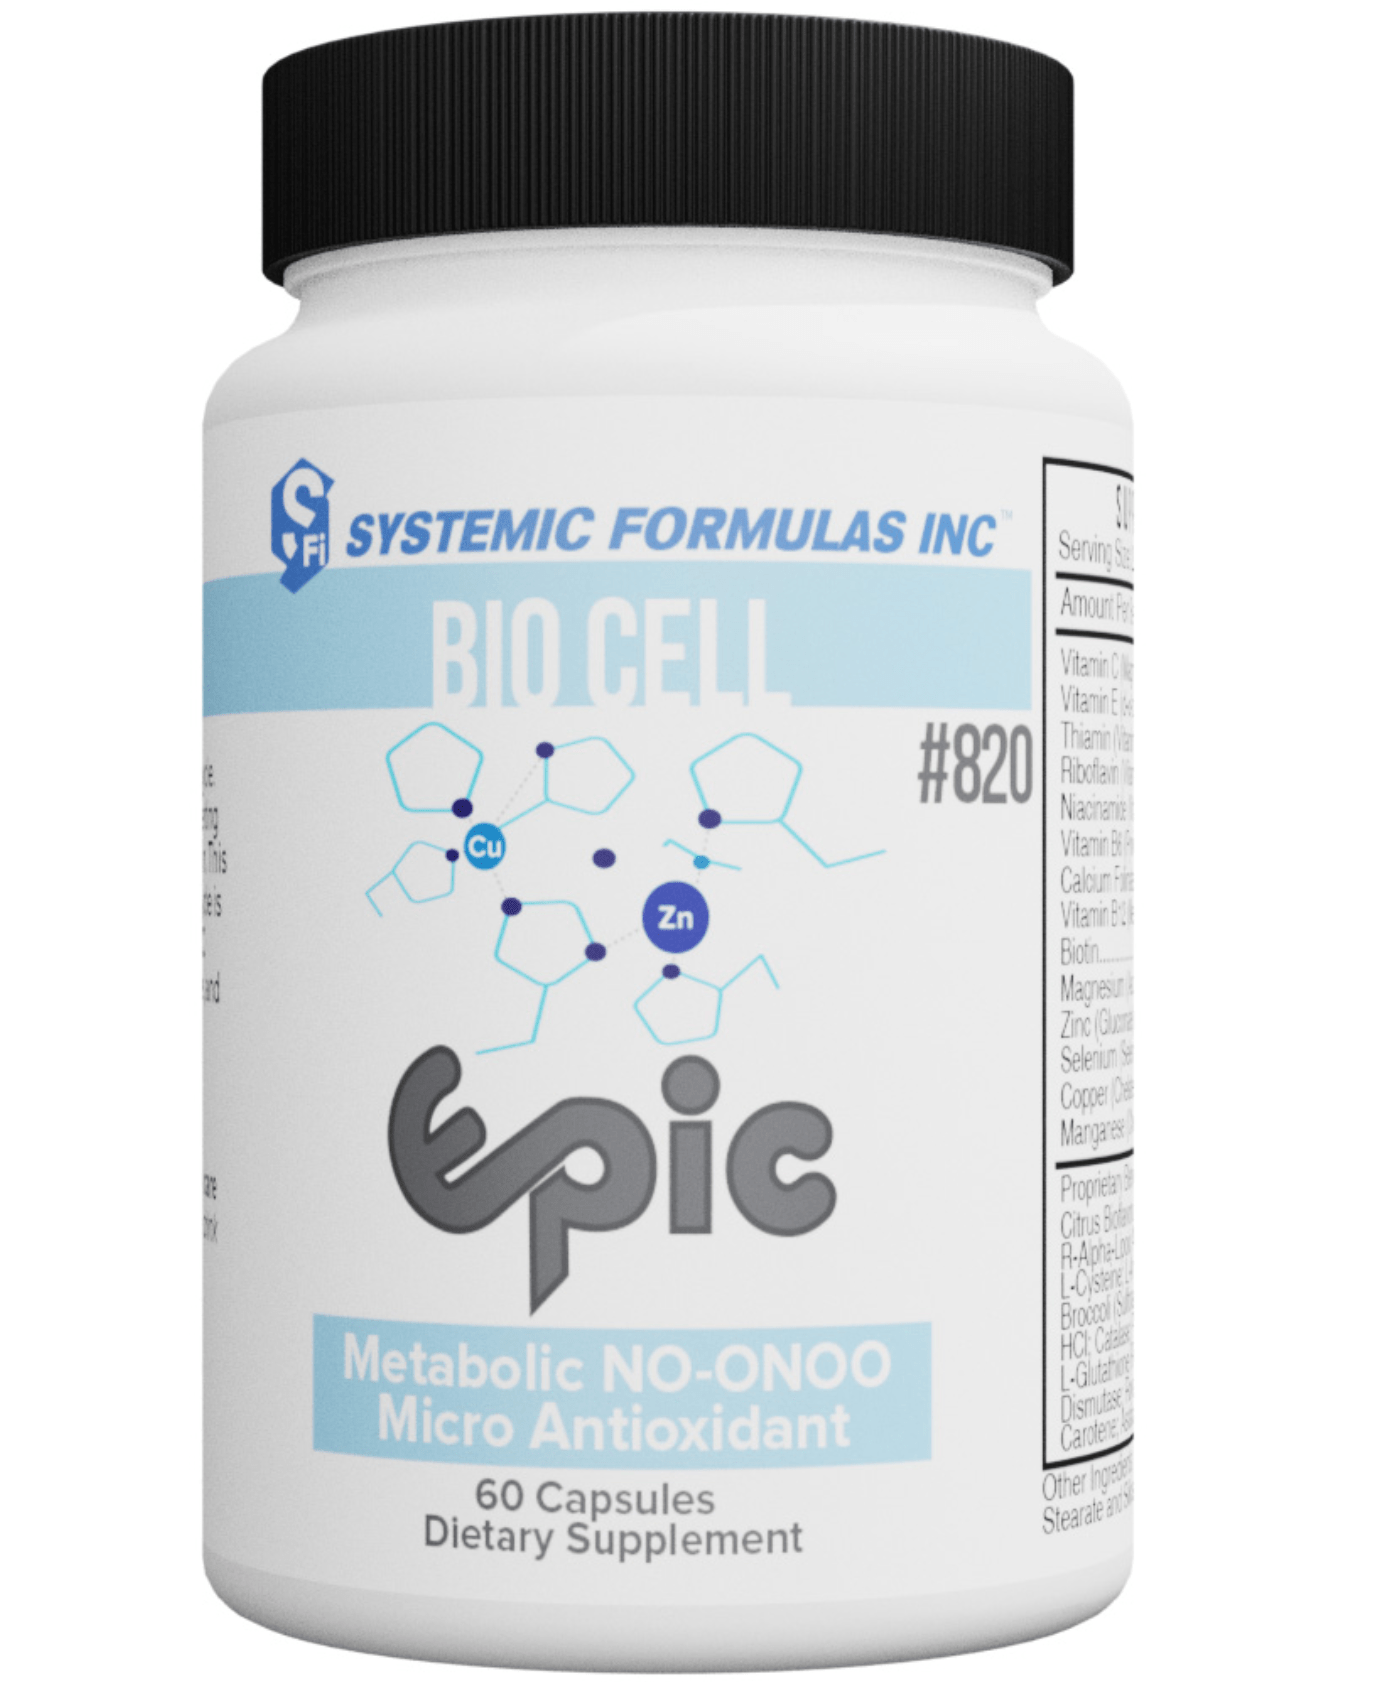 Epic by Systemic Formulas  Metabolic NO-ONOO Micro Intra-Cellular  Antioxidants - NuVision Health Center